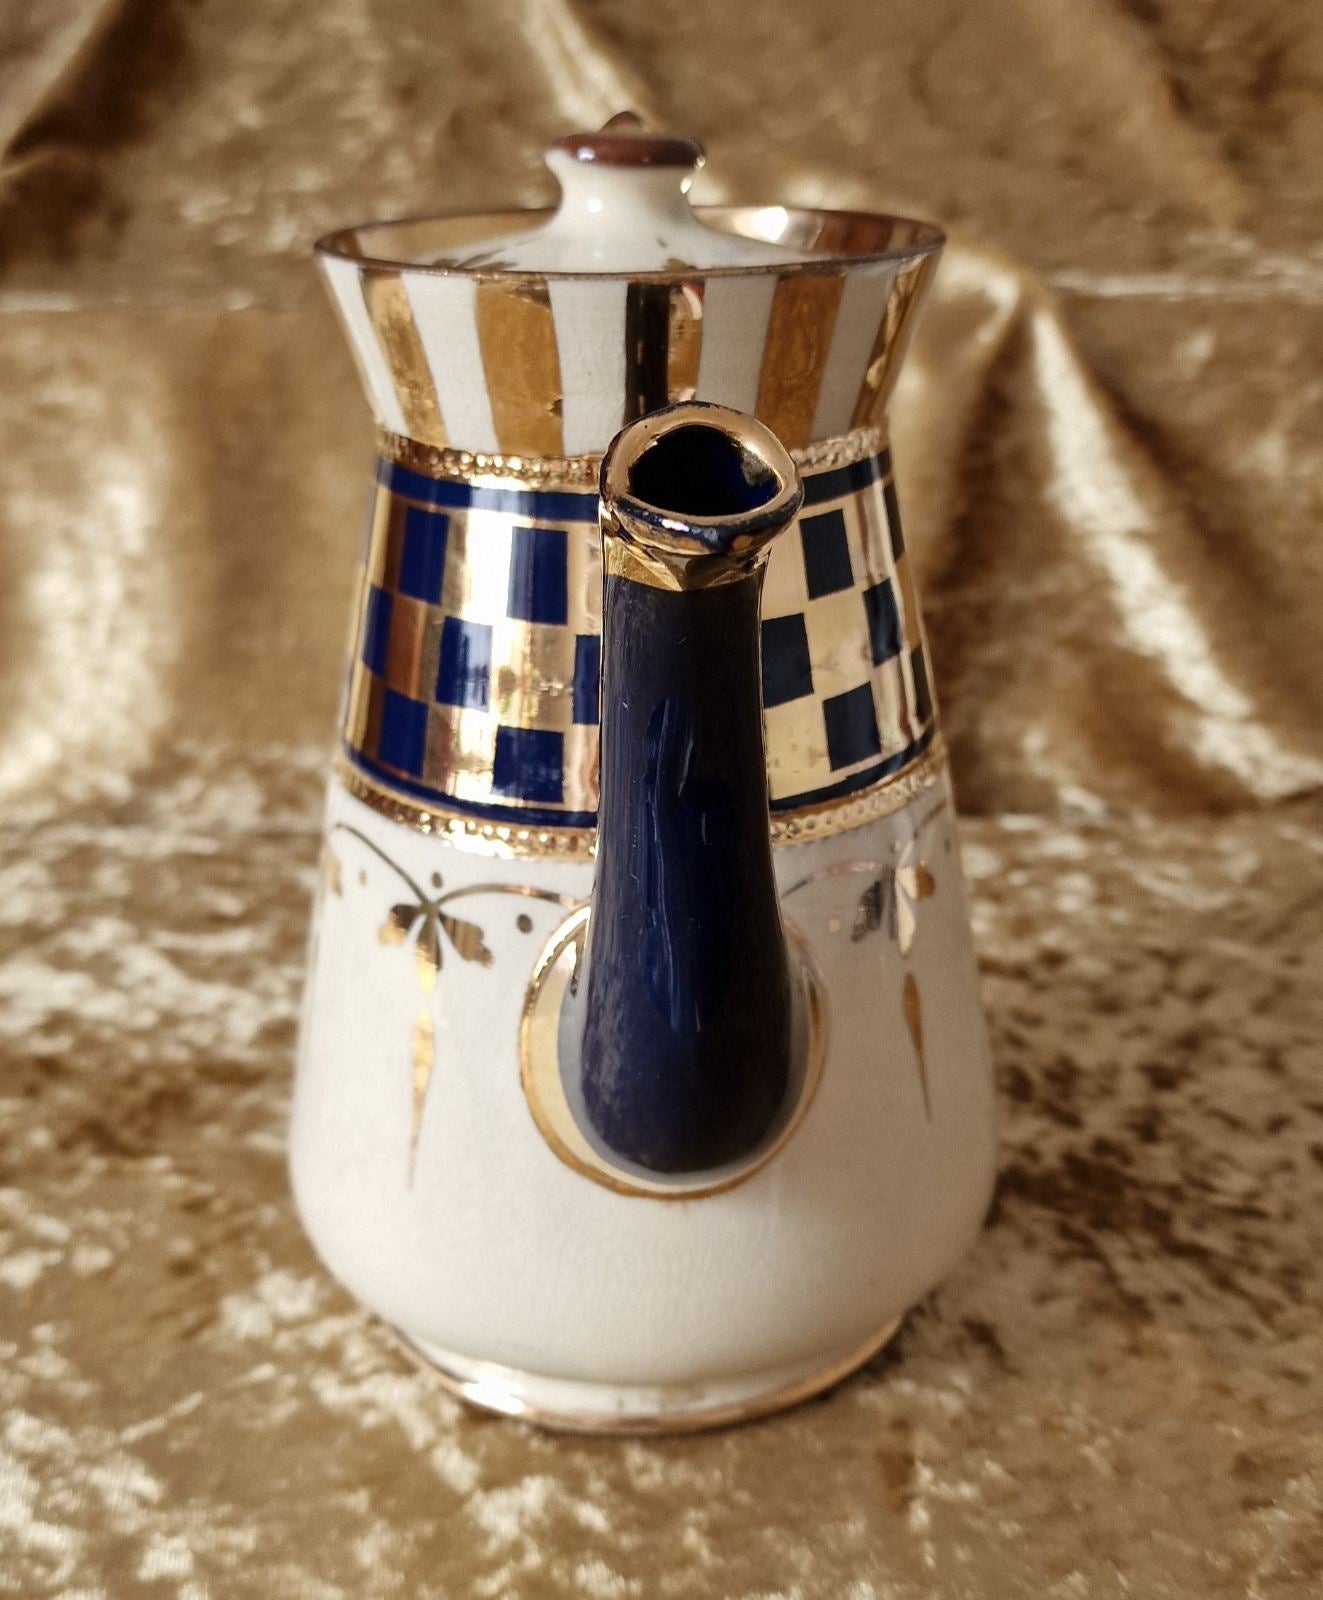 A classic white and blue teapot adorned with elegant gold trim. Perfect for a traditional tea time gathering.